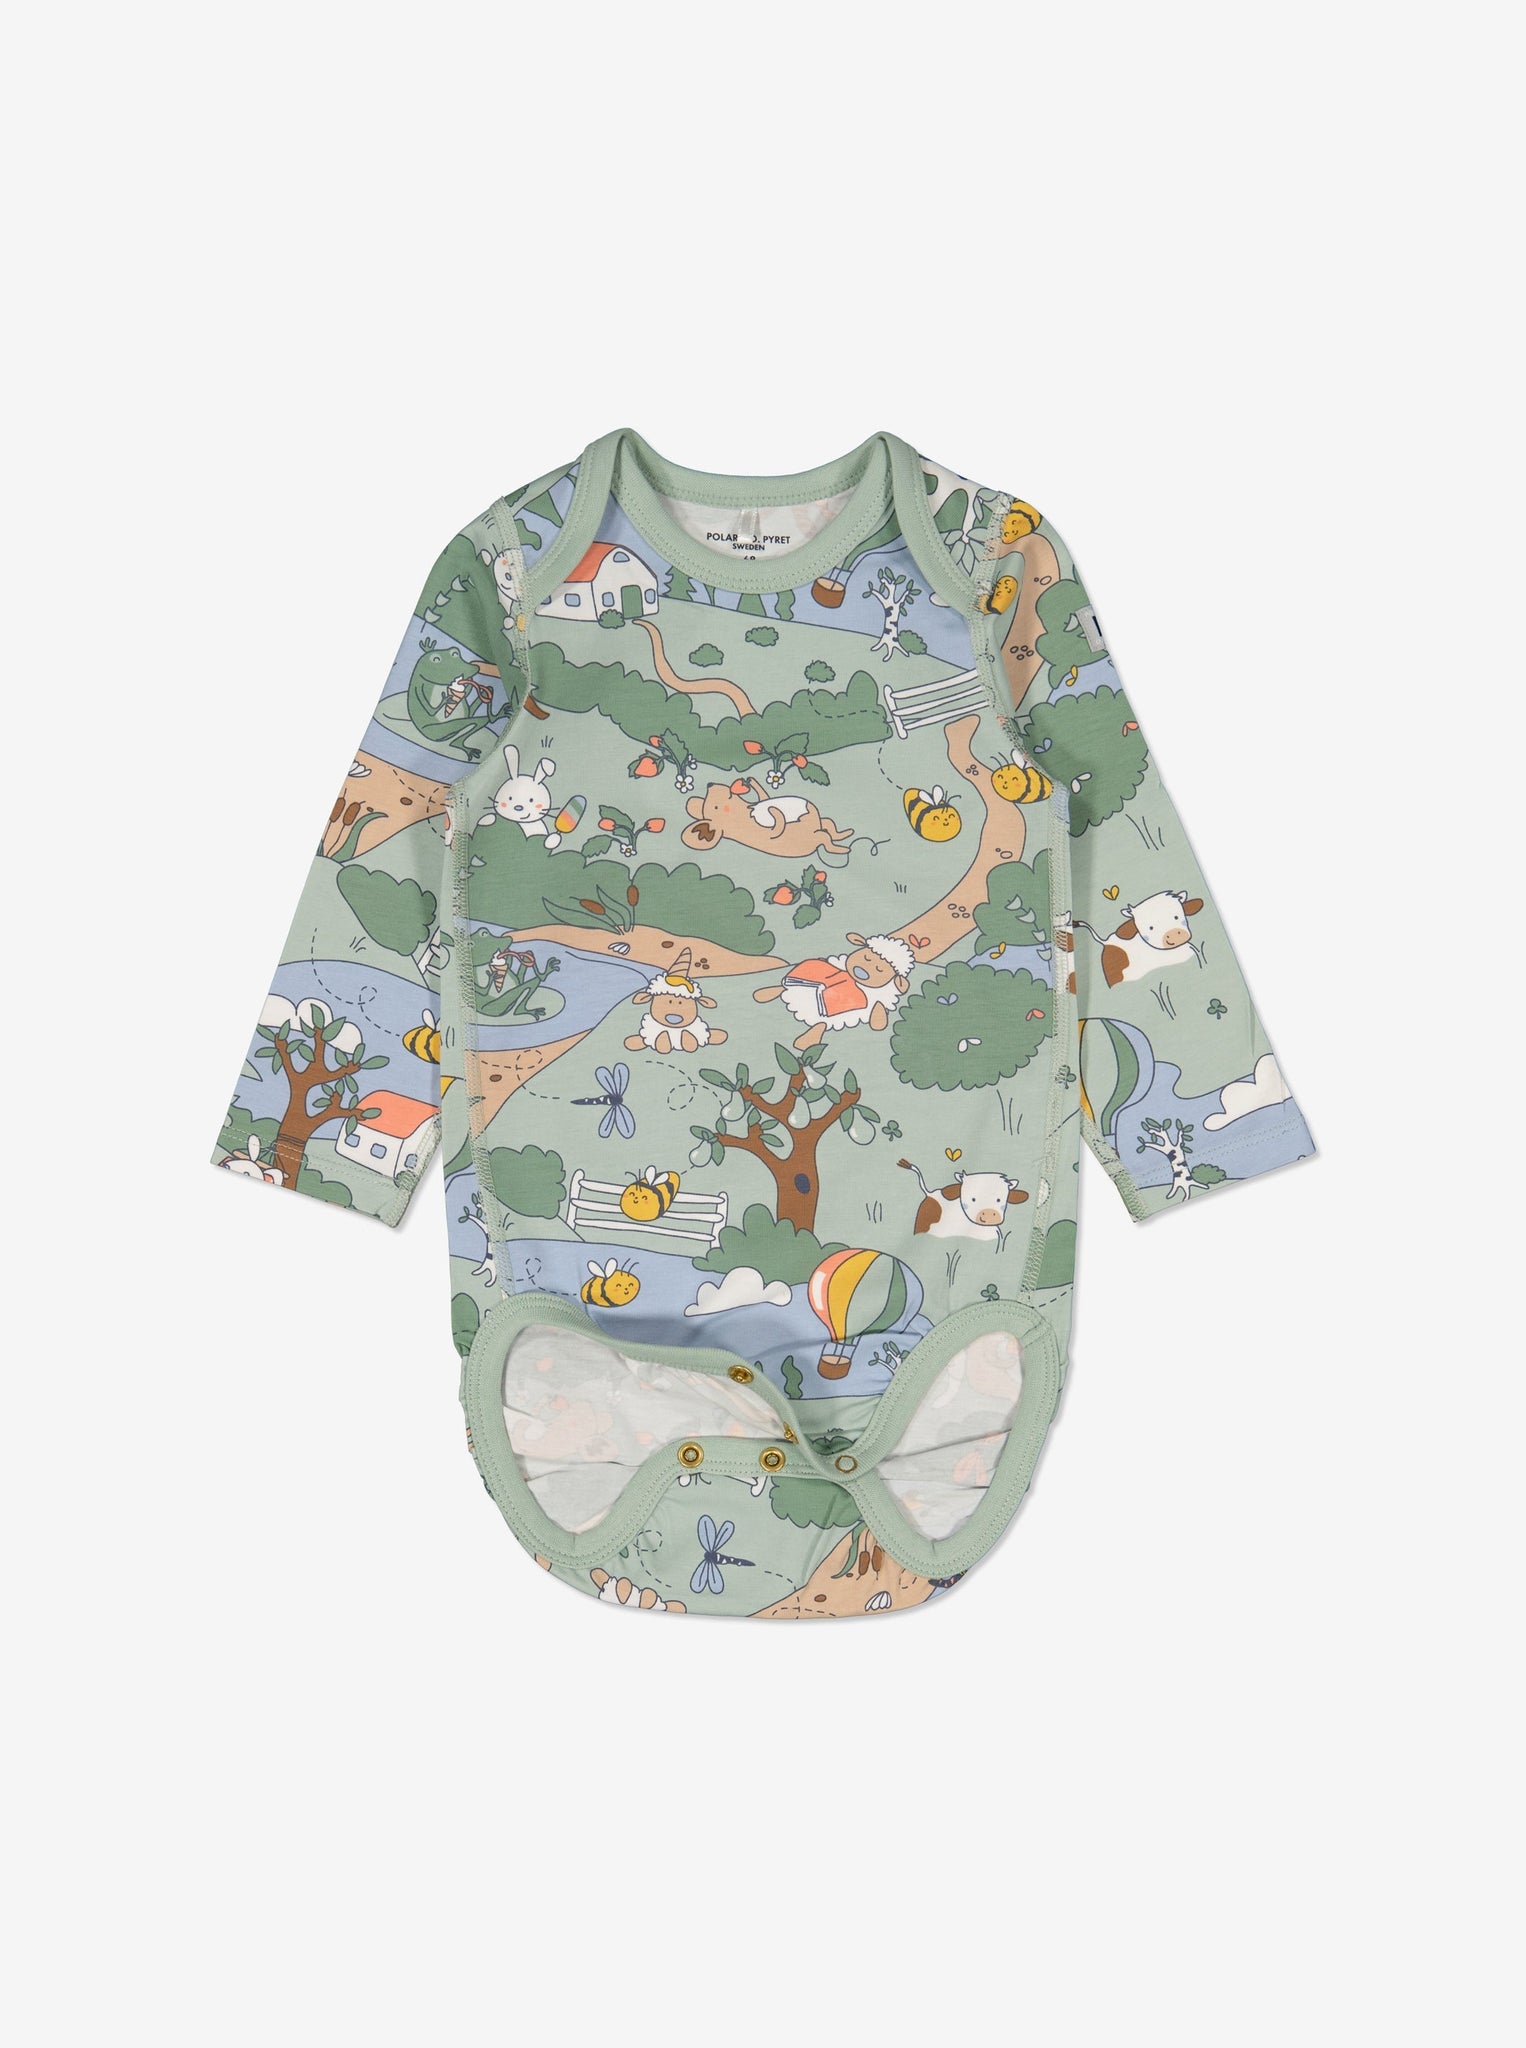 Wildlife Green Newborn Babygrow from Polarn O. Pyret Kidswear. Made using sustainable sourced materials.